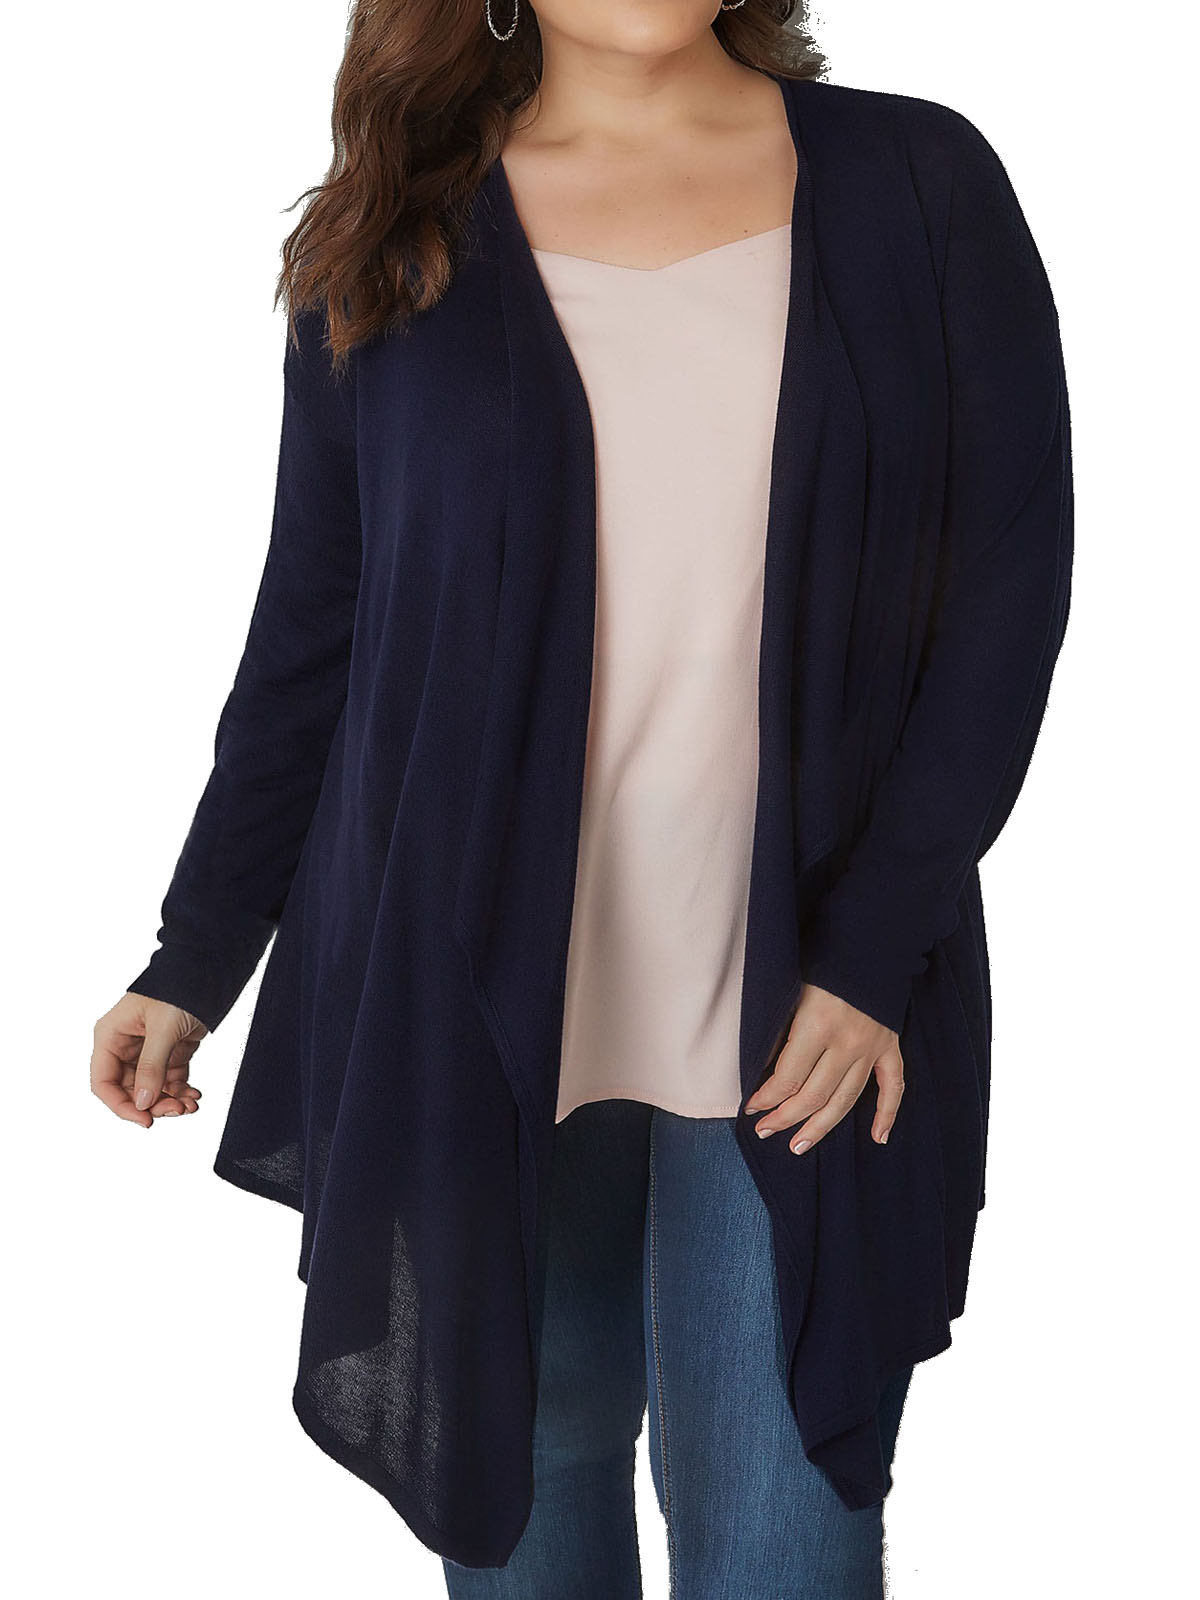 CURVE - - Yours NAVY Longline Waterfall Cardigan - Plus Size 34/36